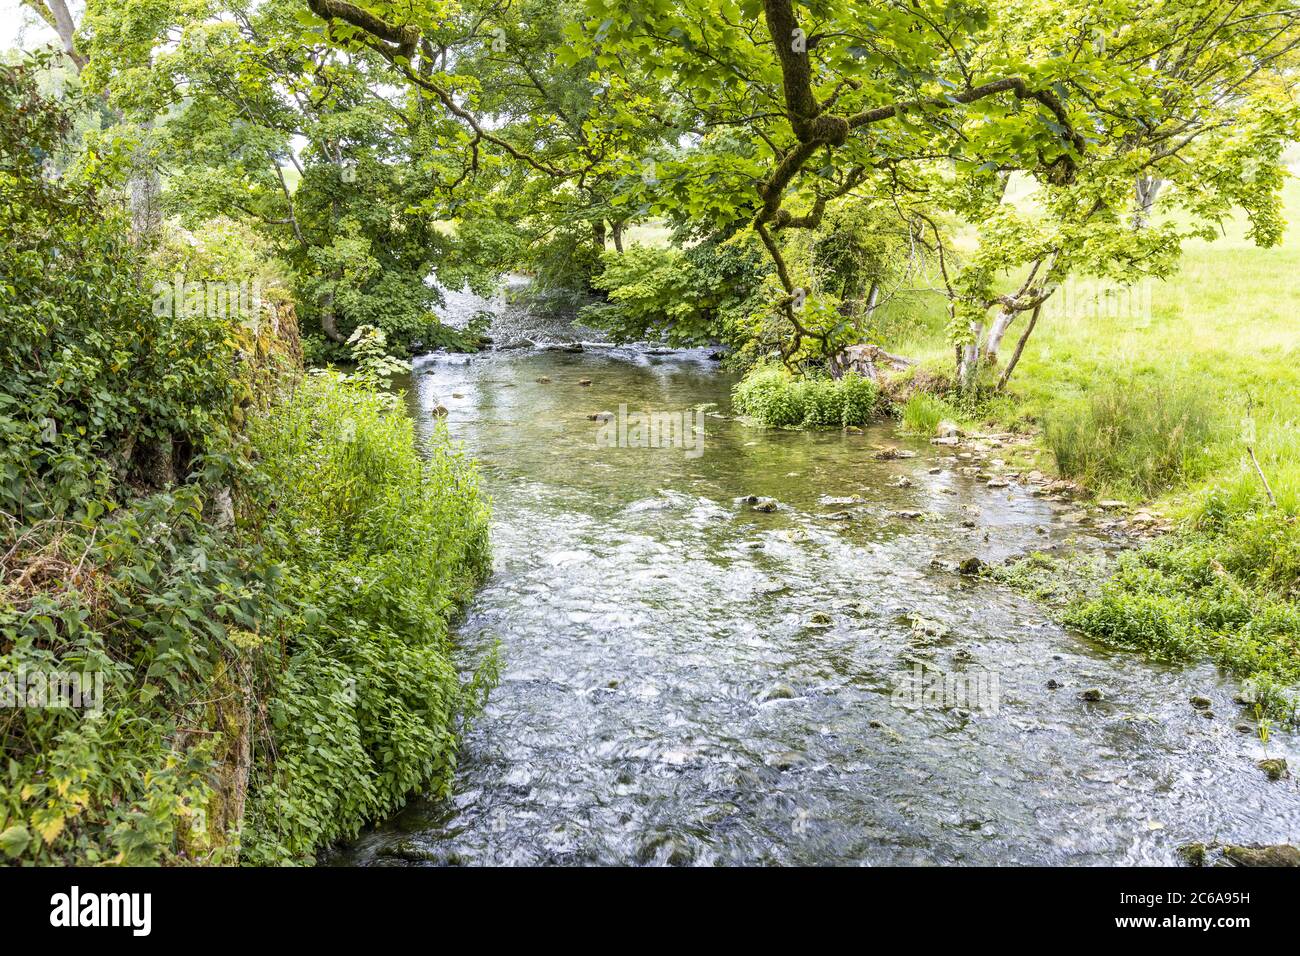 The River Dikler passing by the old mill in the Cotswold village of Upper Swell, Gloucestershire UK Stock Photo